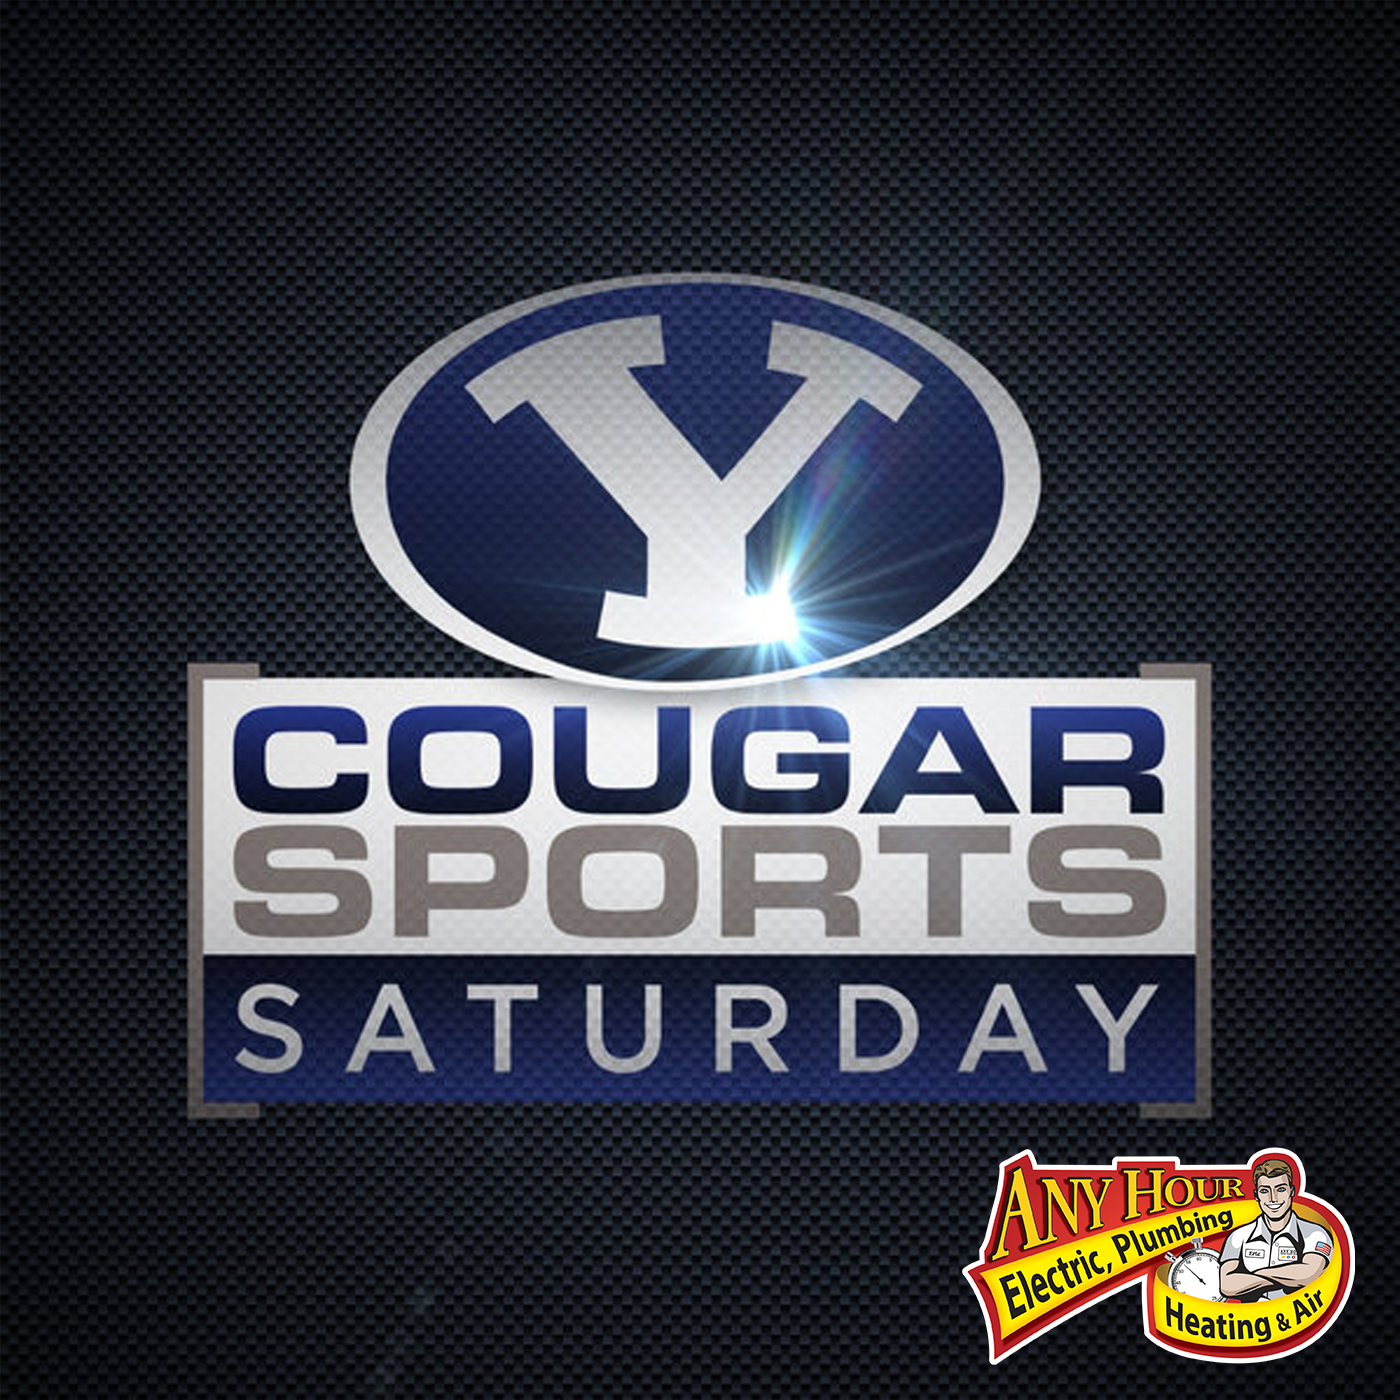 Cougar Classic: #20 BYU upsets #3 Oklahoma in 2009